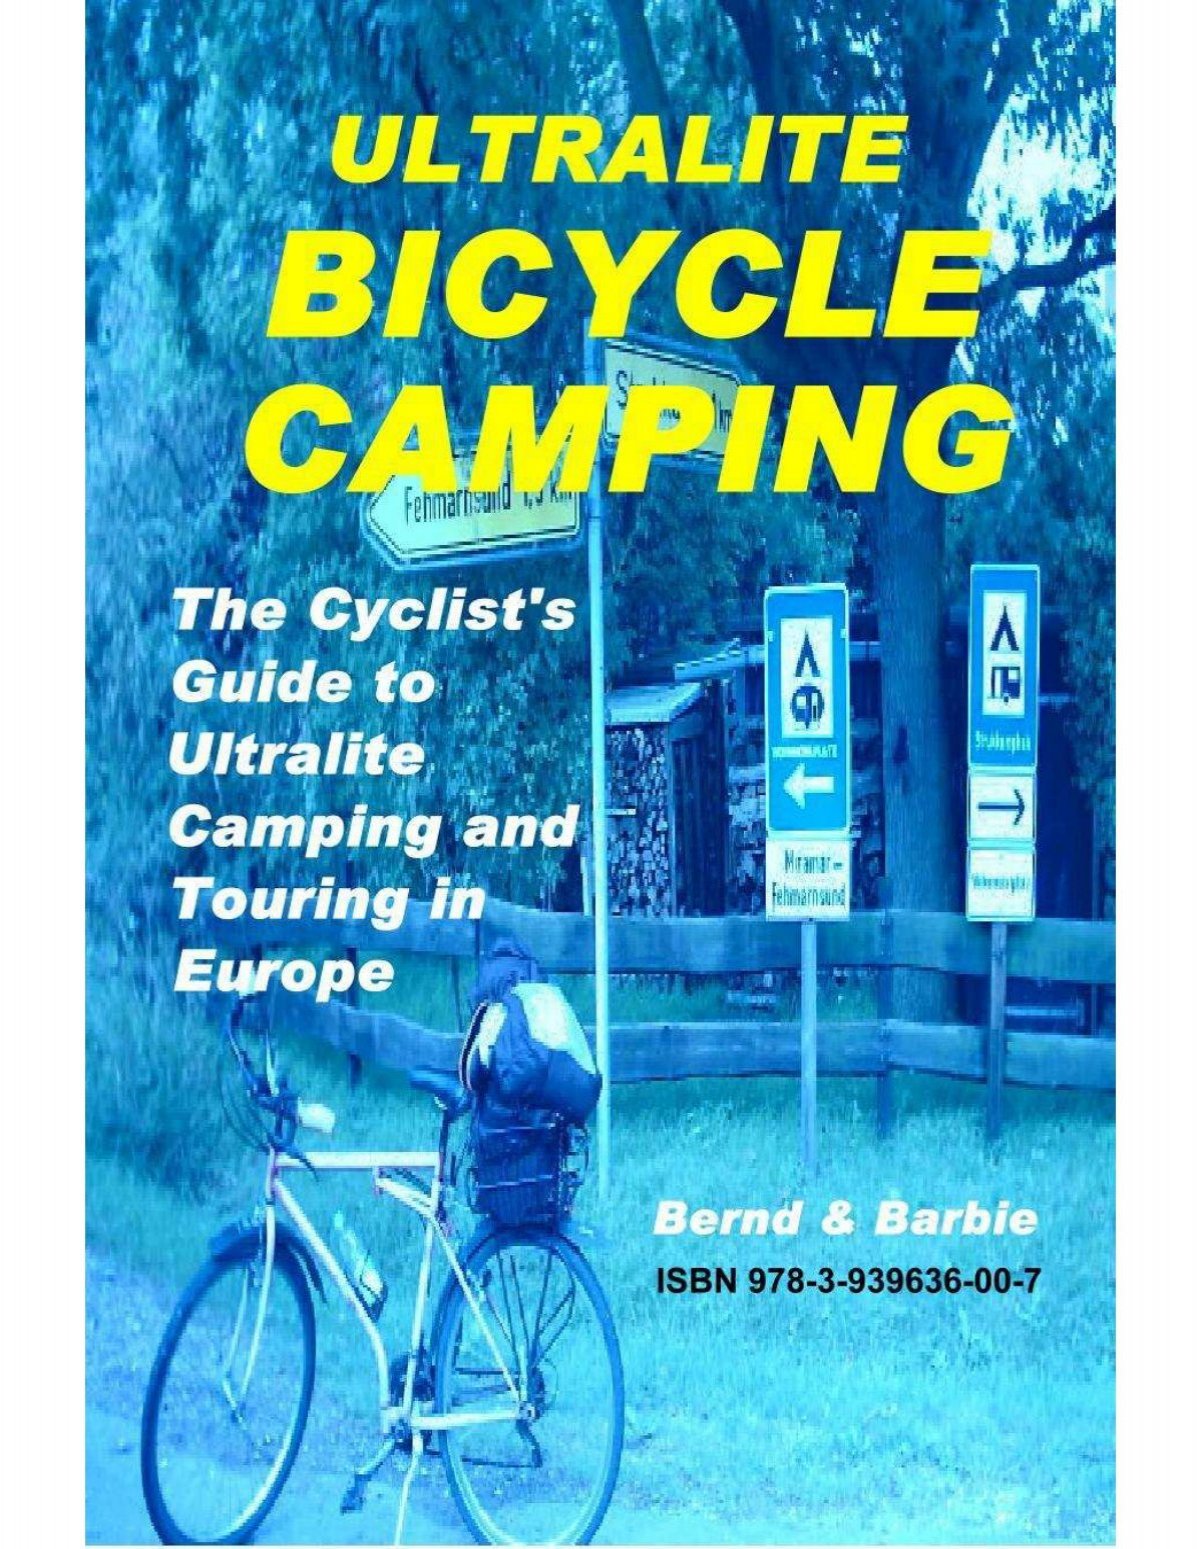 Ultralite Bicycle Camping - e-book - Bicycle Touring Pro | Sonnenbrillen